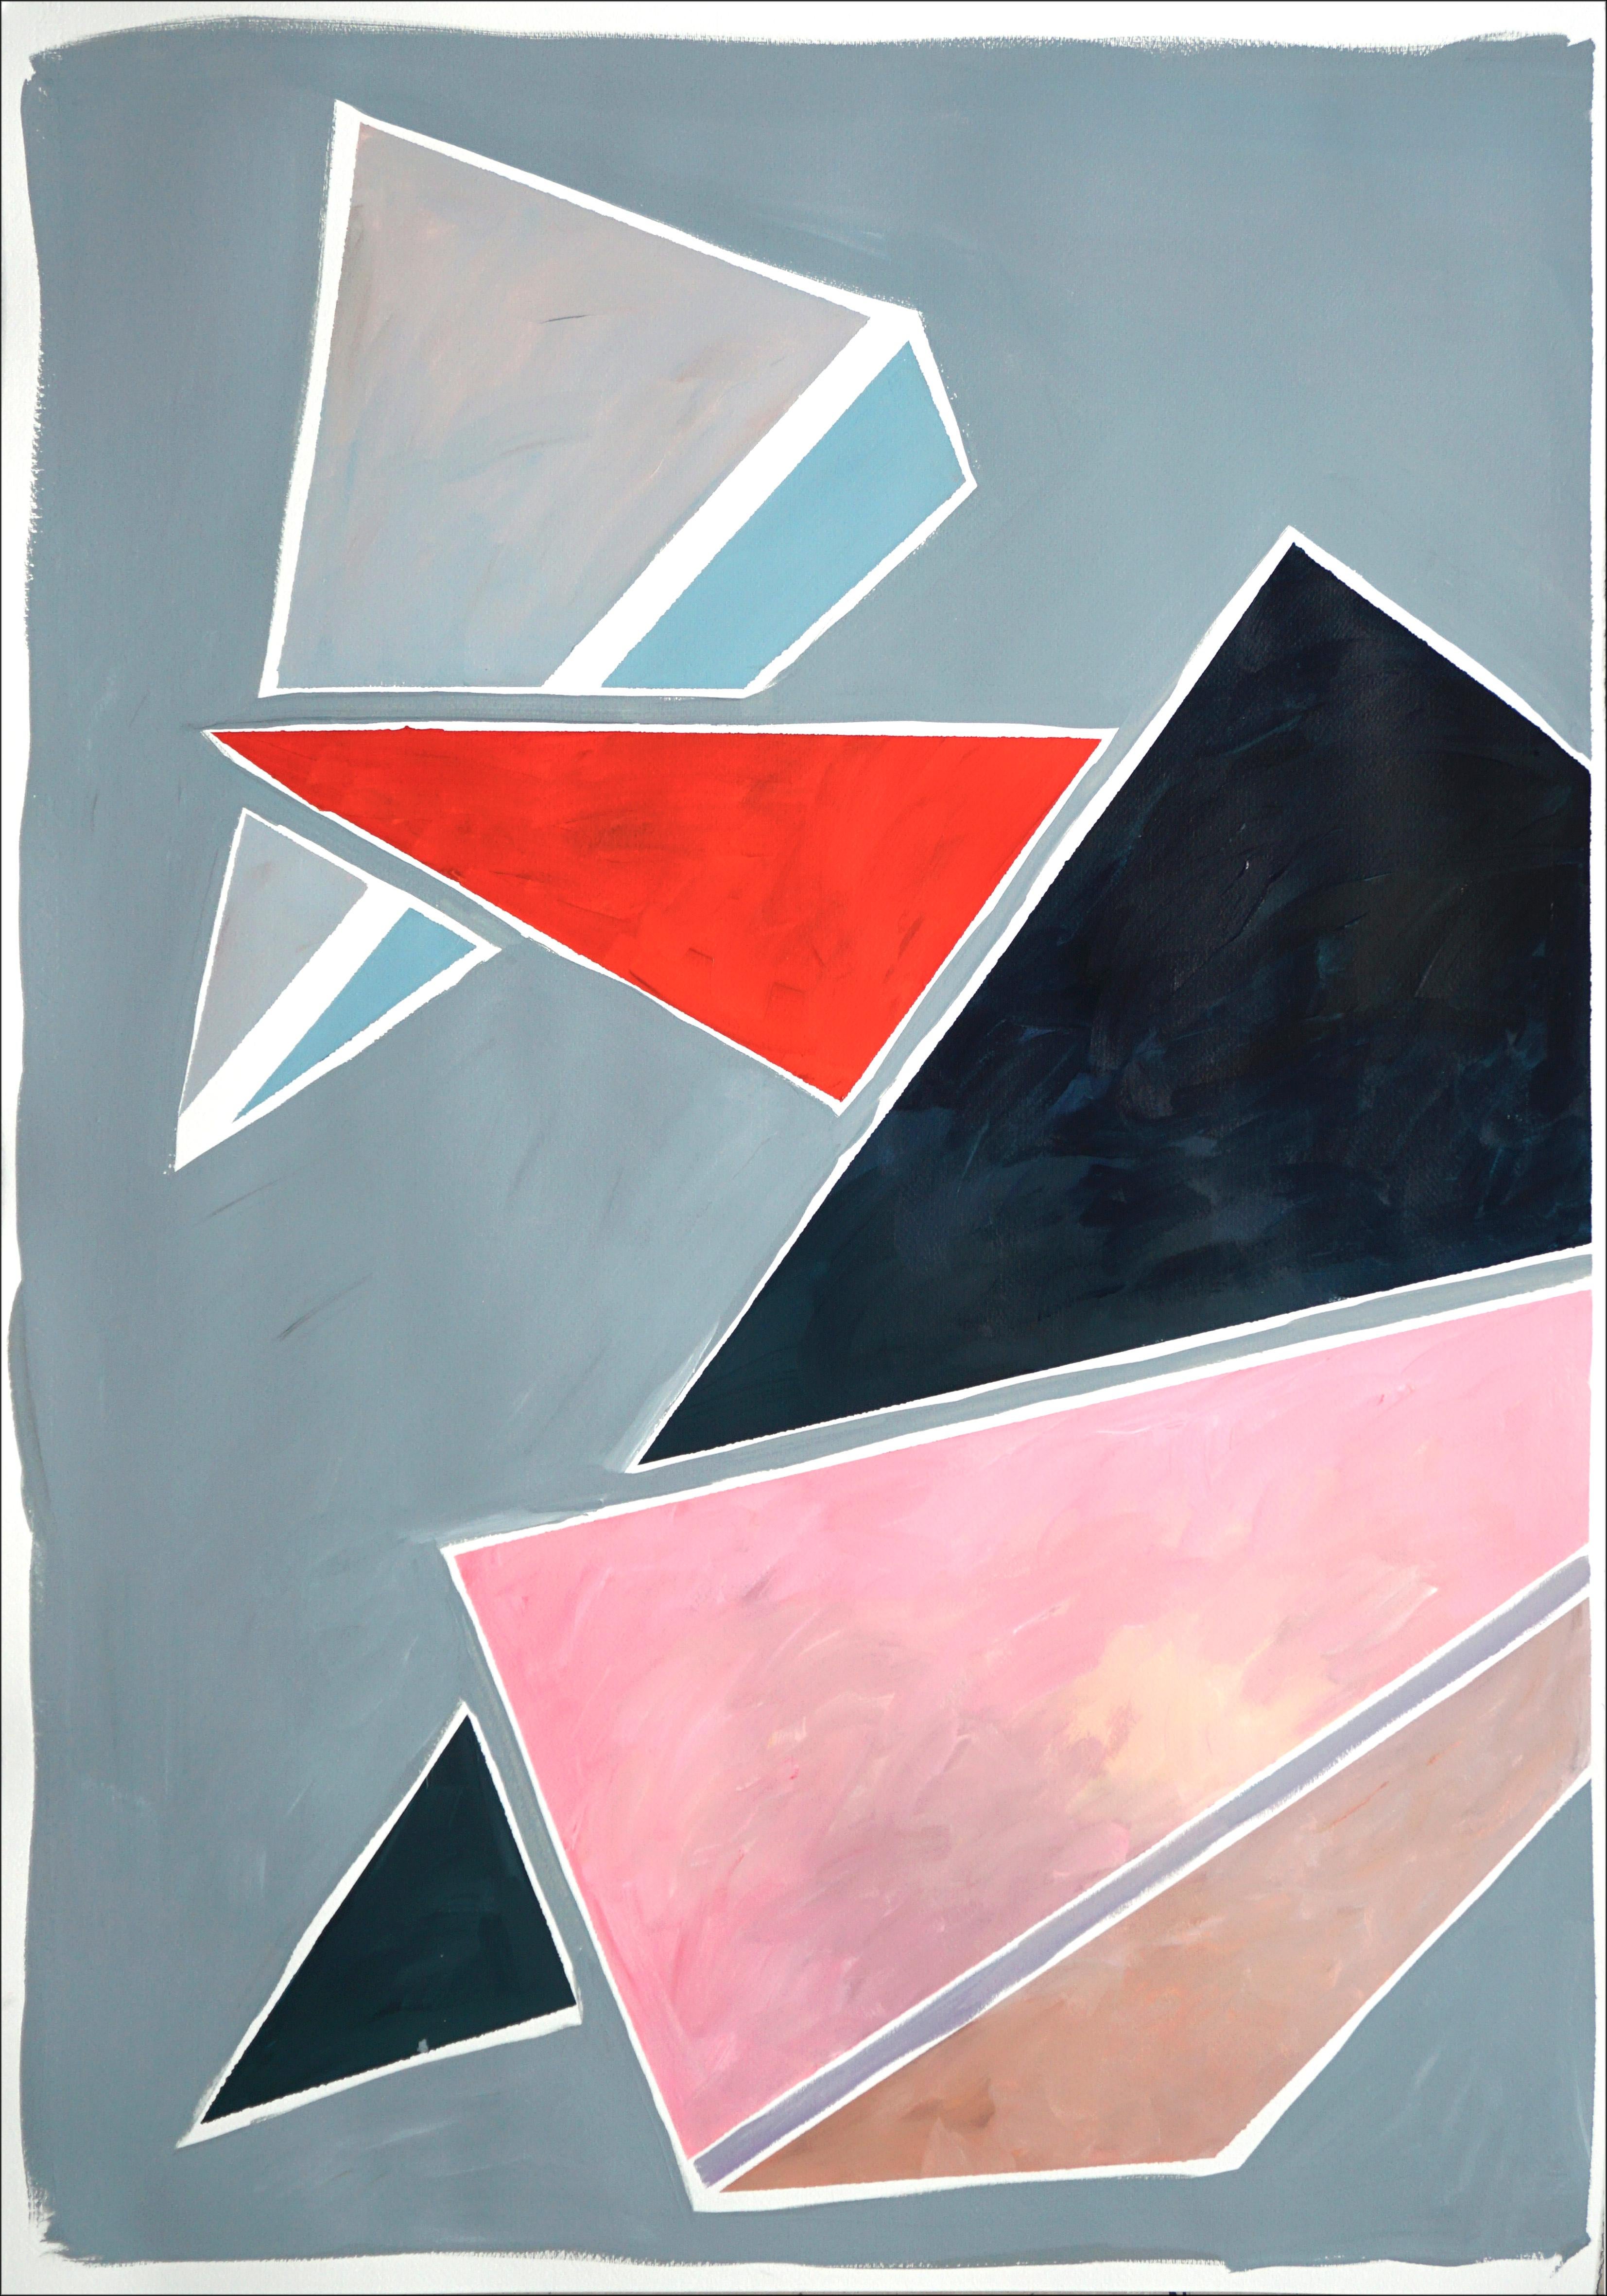 Triangles Breaking Symmetry, Extra Large Diptych, Pastel Futuristic Geometry - Constructivist Painting by Natalia Roman